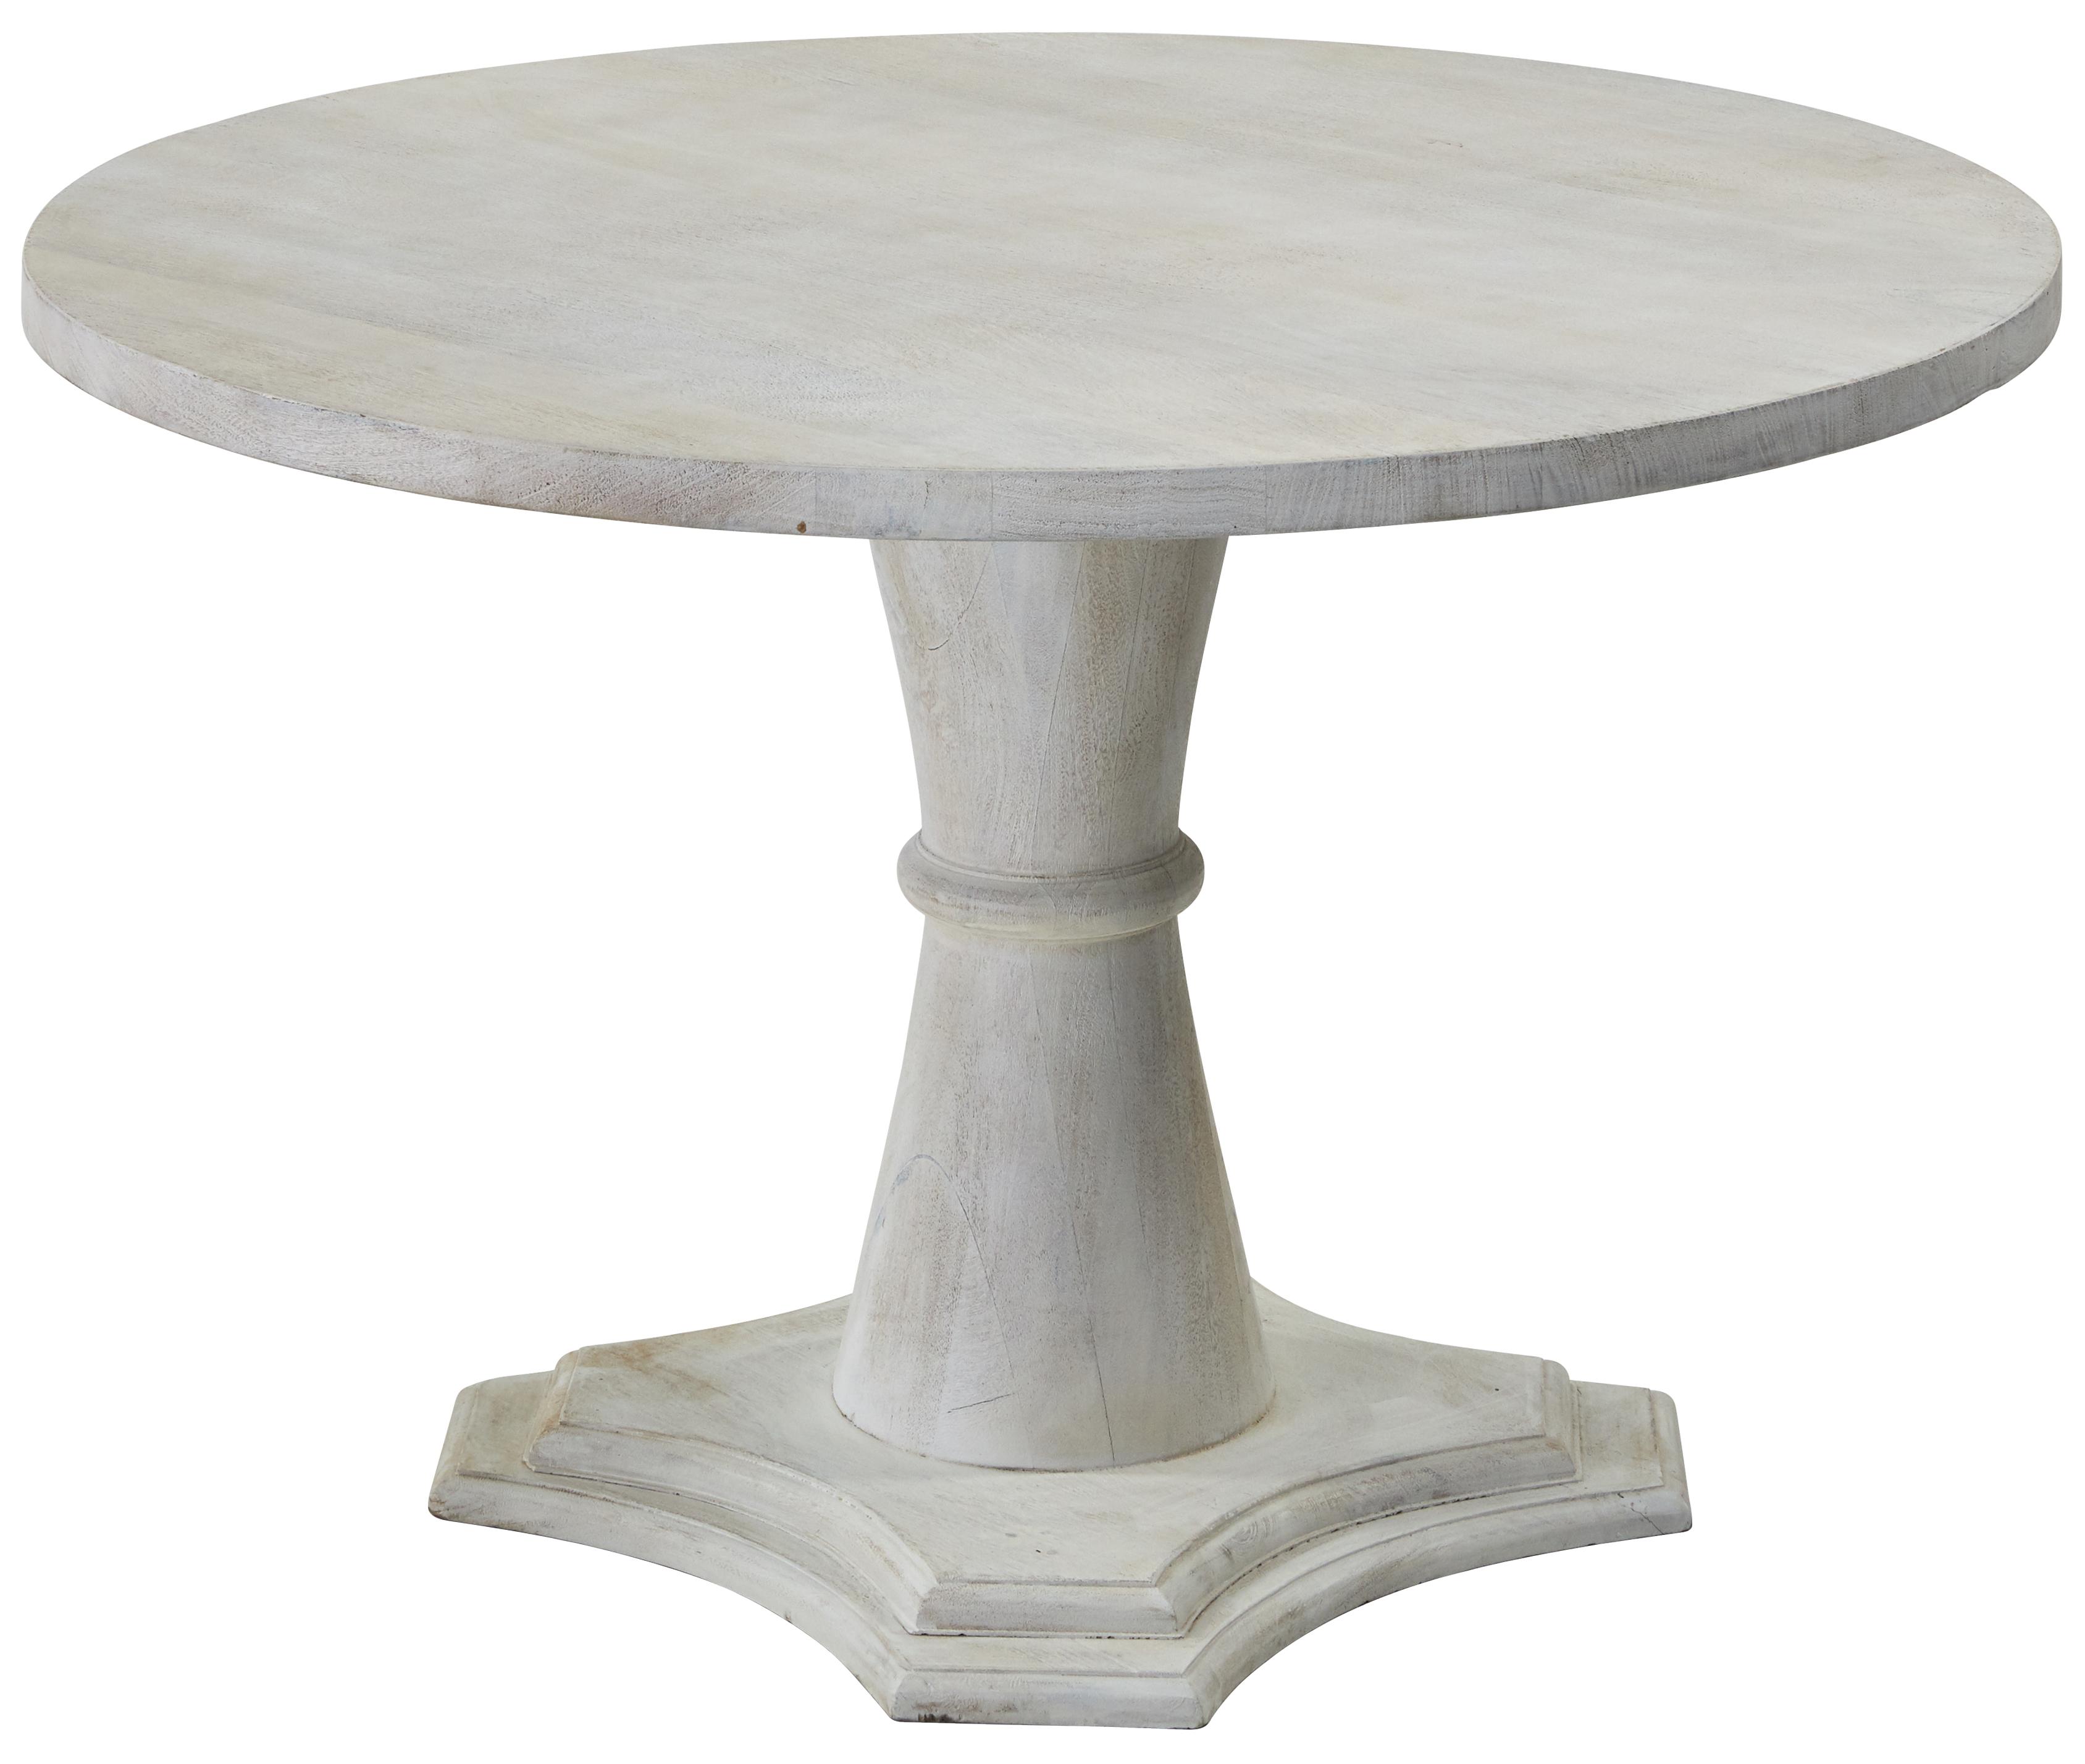 Transitional Dining Table SS-10177 Mendon SS-10177 in whitewash 